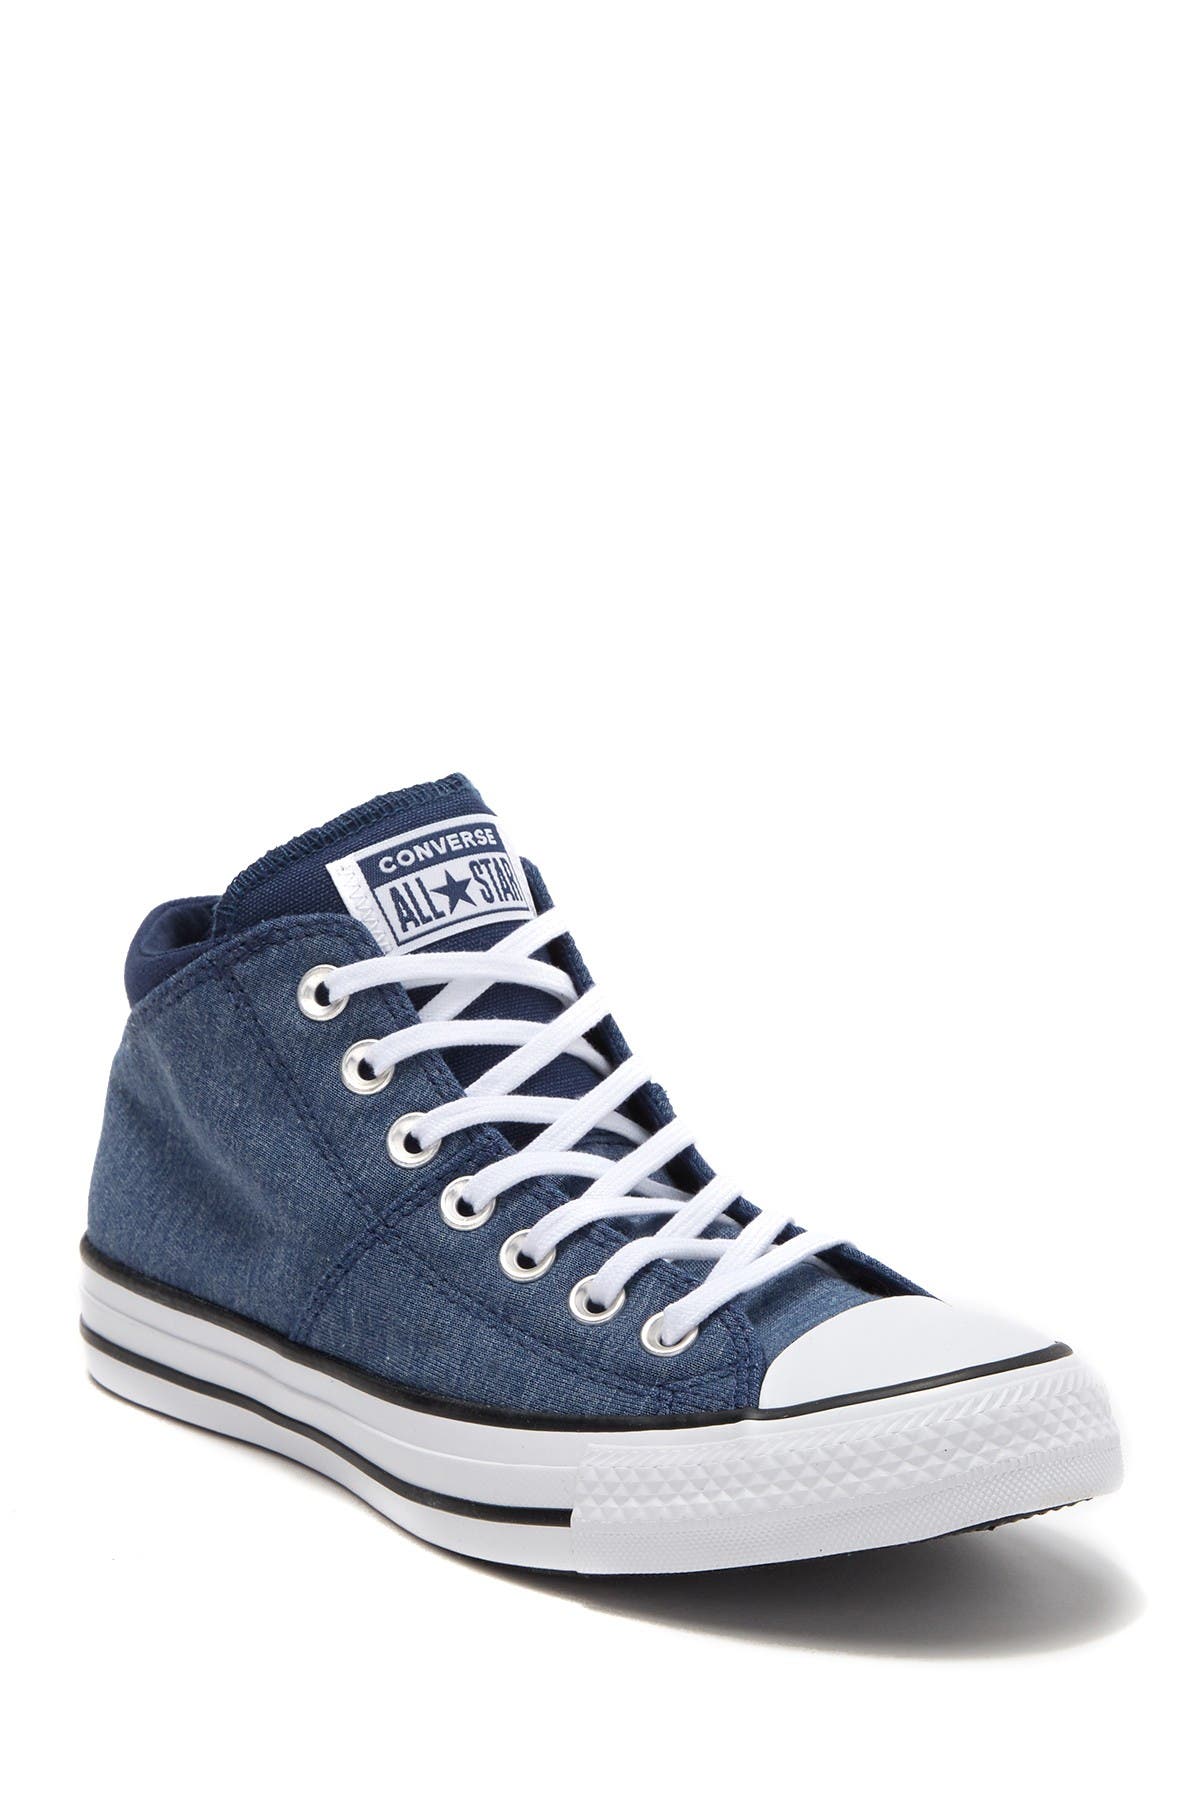 Madison Converse Online Sale, UP TO 63% OFF